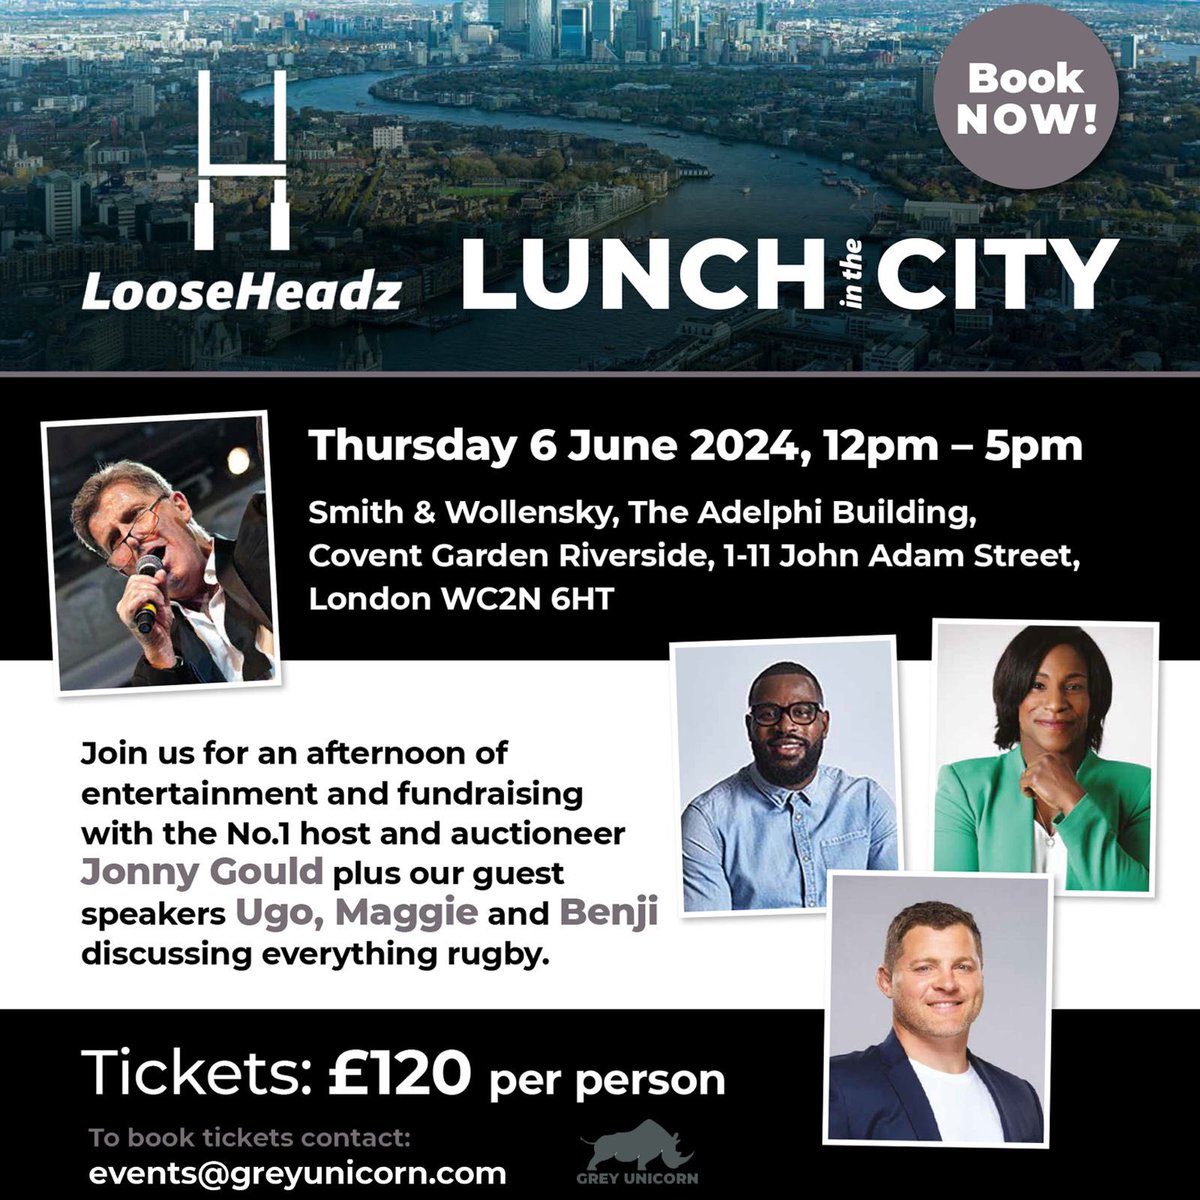 𝗟𝘂𝗻𝗰𝗵 𝗶𝗻 𝘁𝗵𝗲 𝗖𝗶𝘁𝘆 🏙️ Join us for an afternoon of entertainment and fundraising with Jonny Gould, Ugo Monye, Maggie Alphonsi, and Benji Kayser 🖤🤍 Grab your tickets now 🎟️ #TackleTheStigma 🗣️